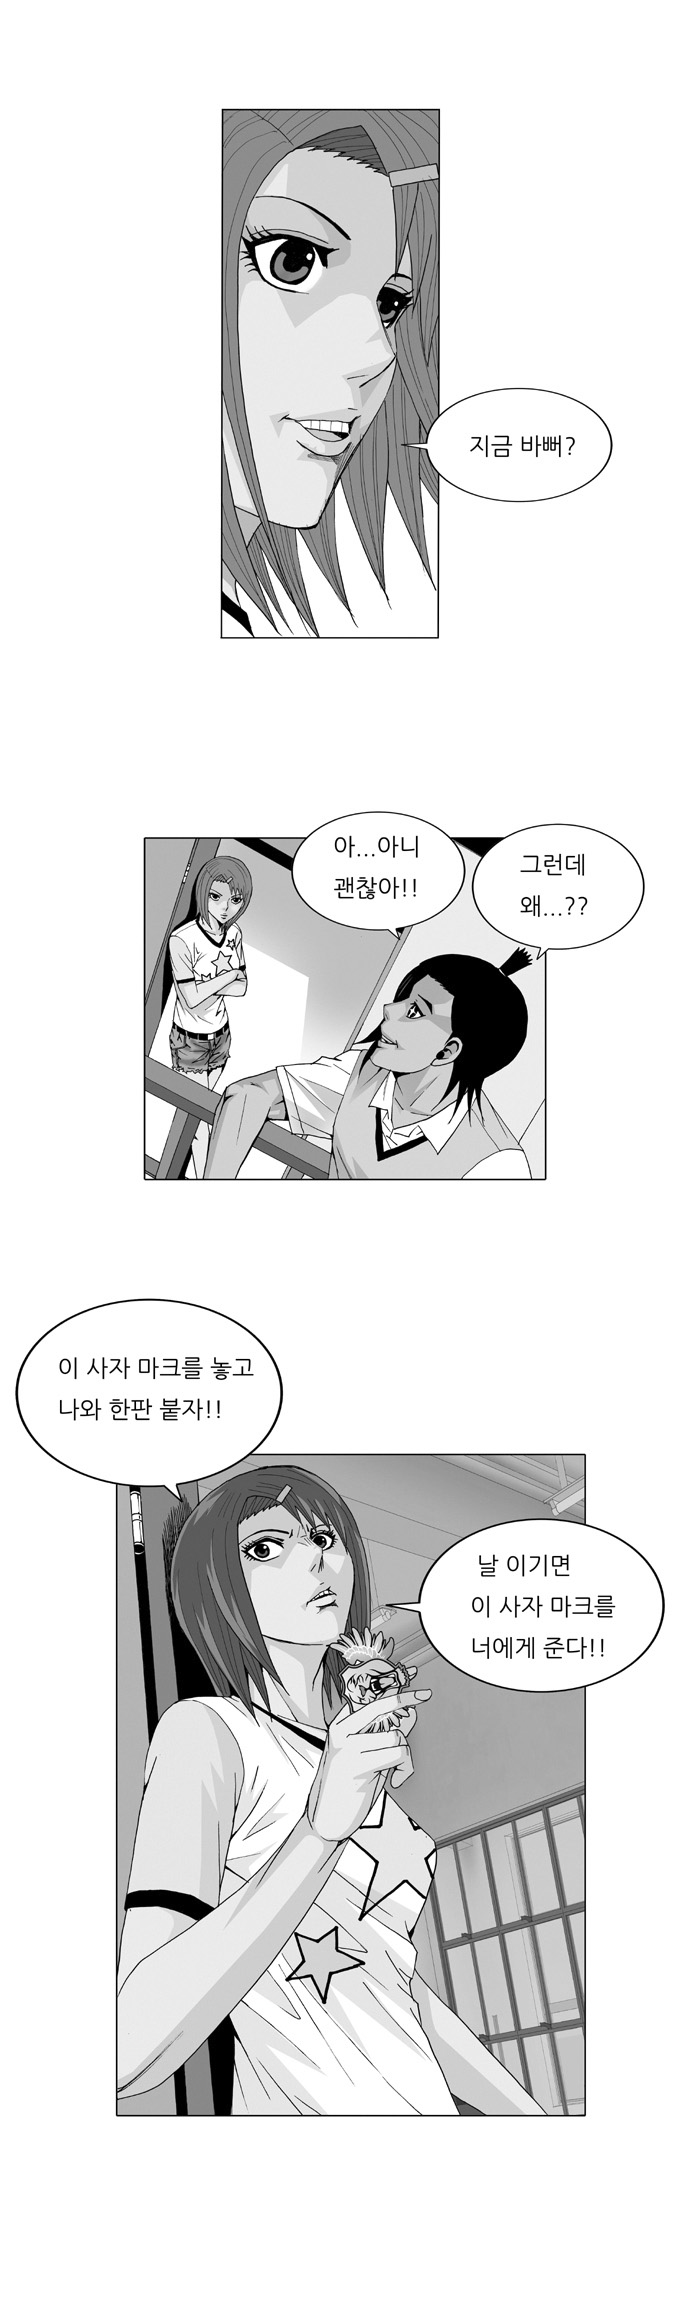 Ultimate Legend - Kang Hae Hyo - Chapter 27 - Page 1